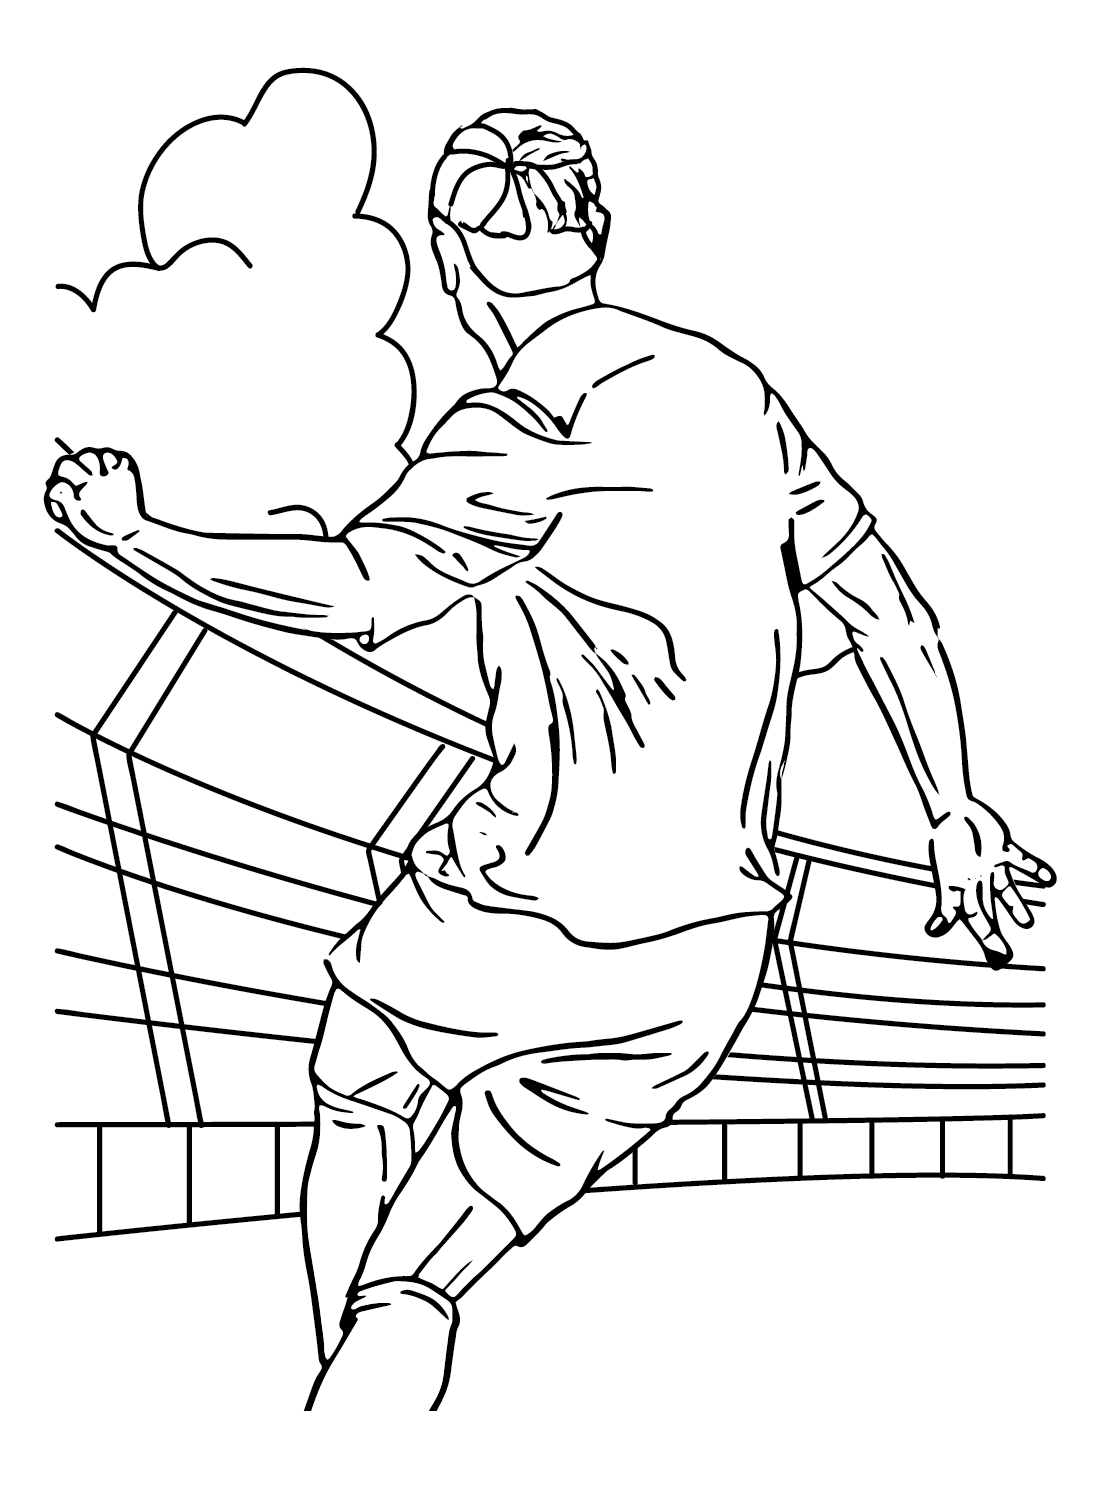 Erling Haaland to Color Coloring Page